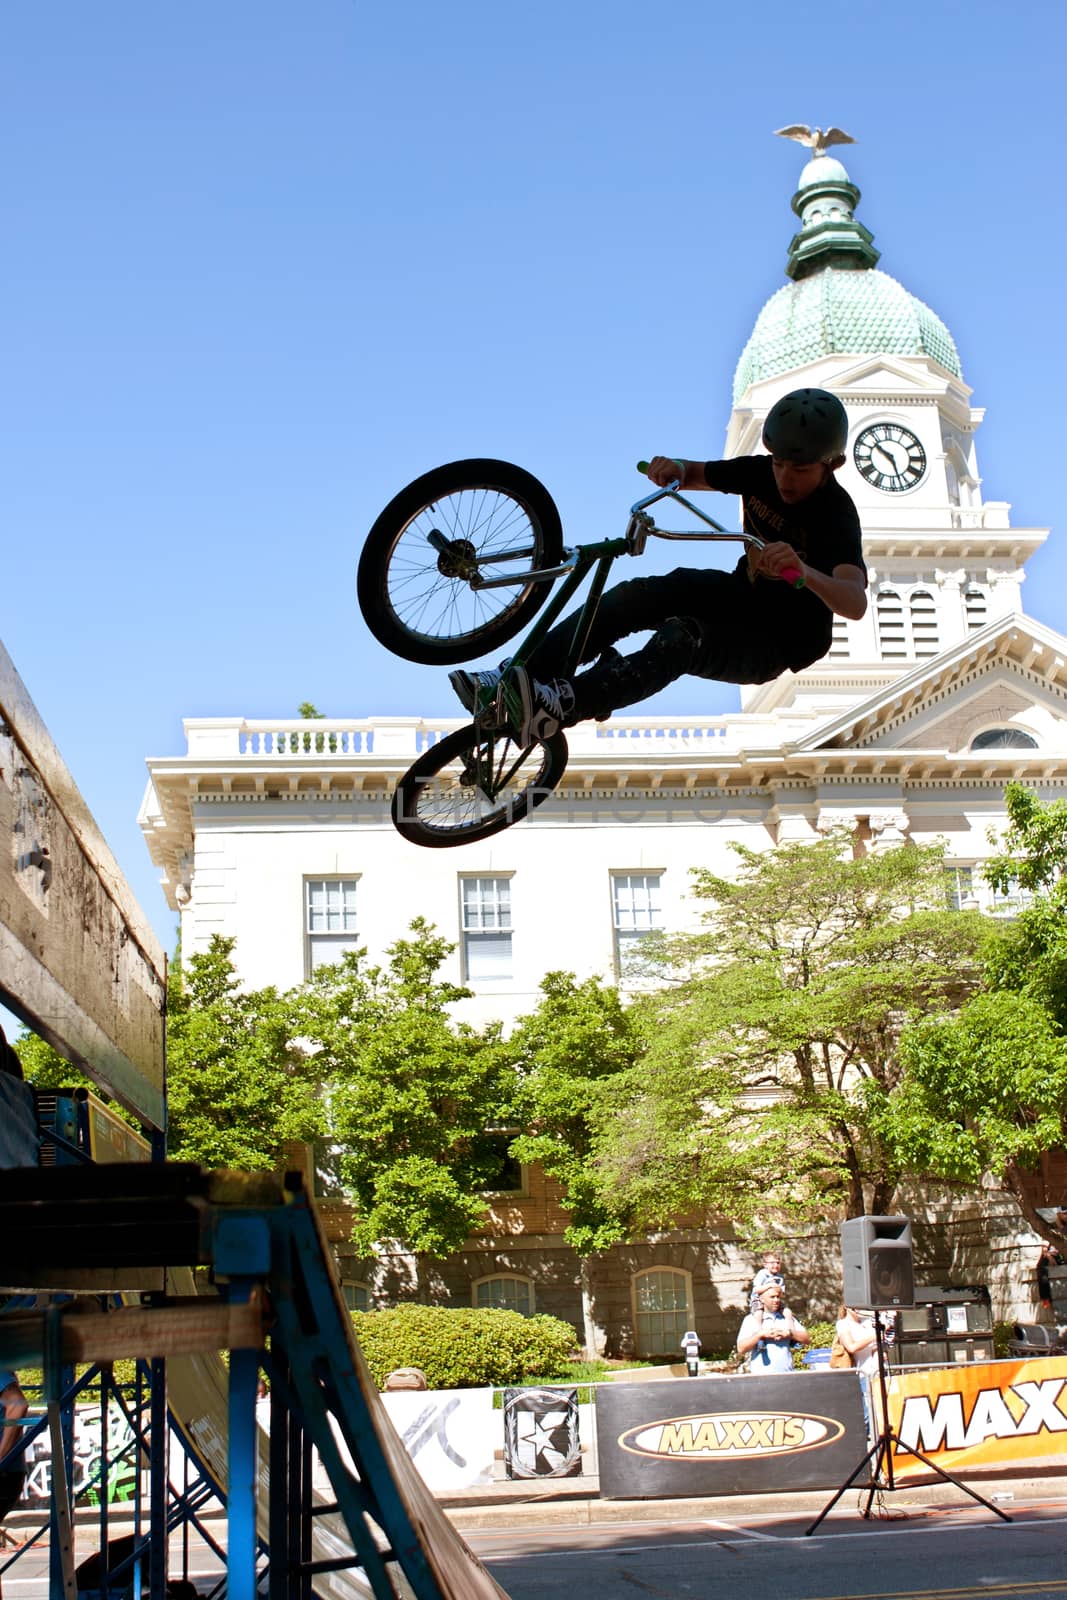 Teenage Boy Practices Ramp Jumps At BMX Competition by BluIz60